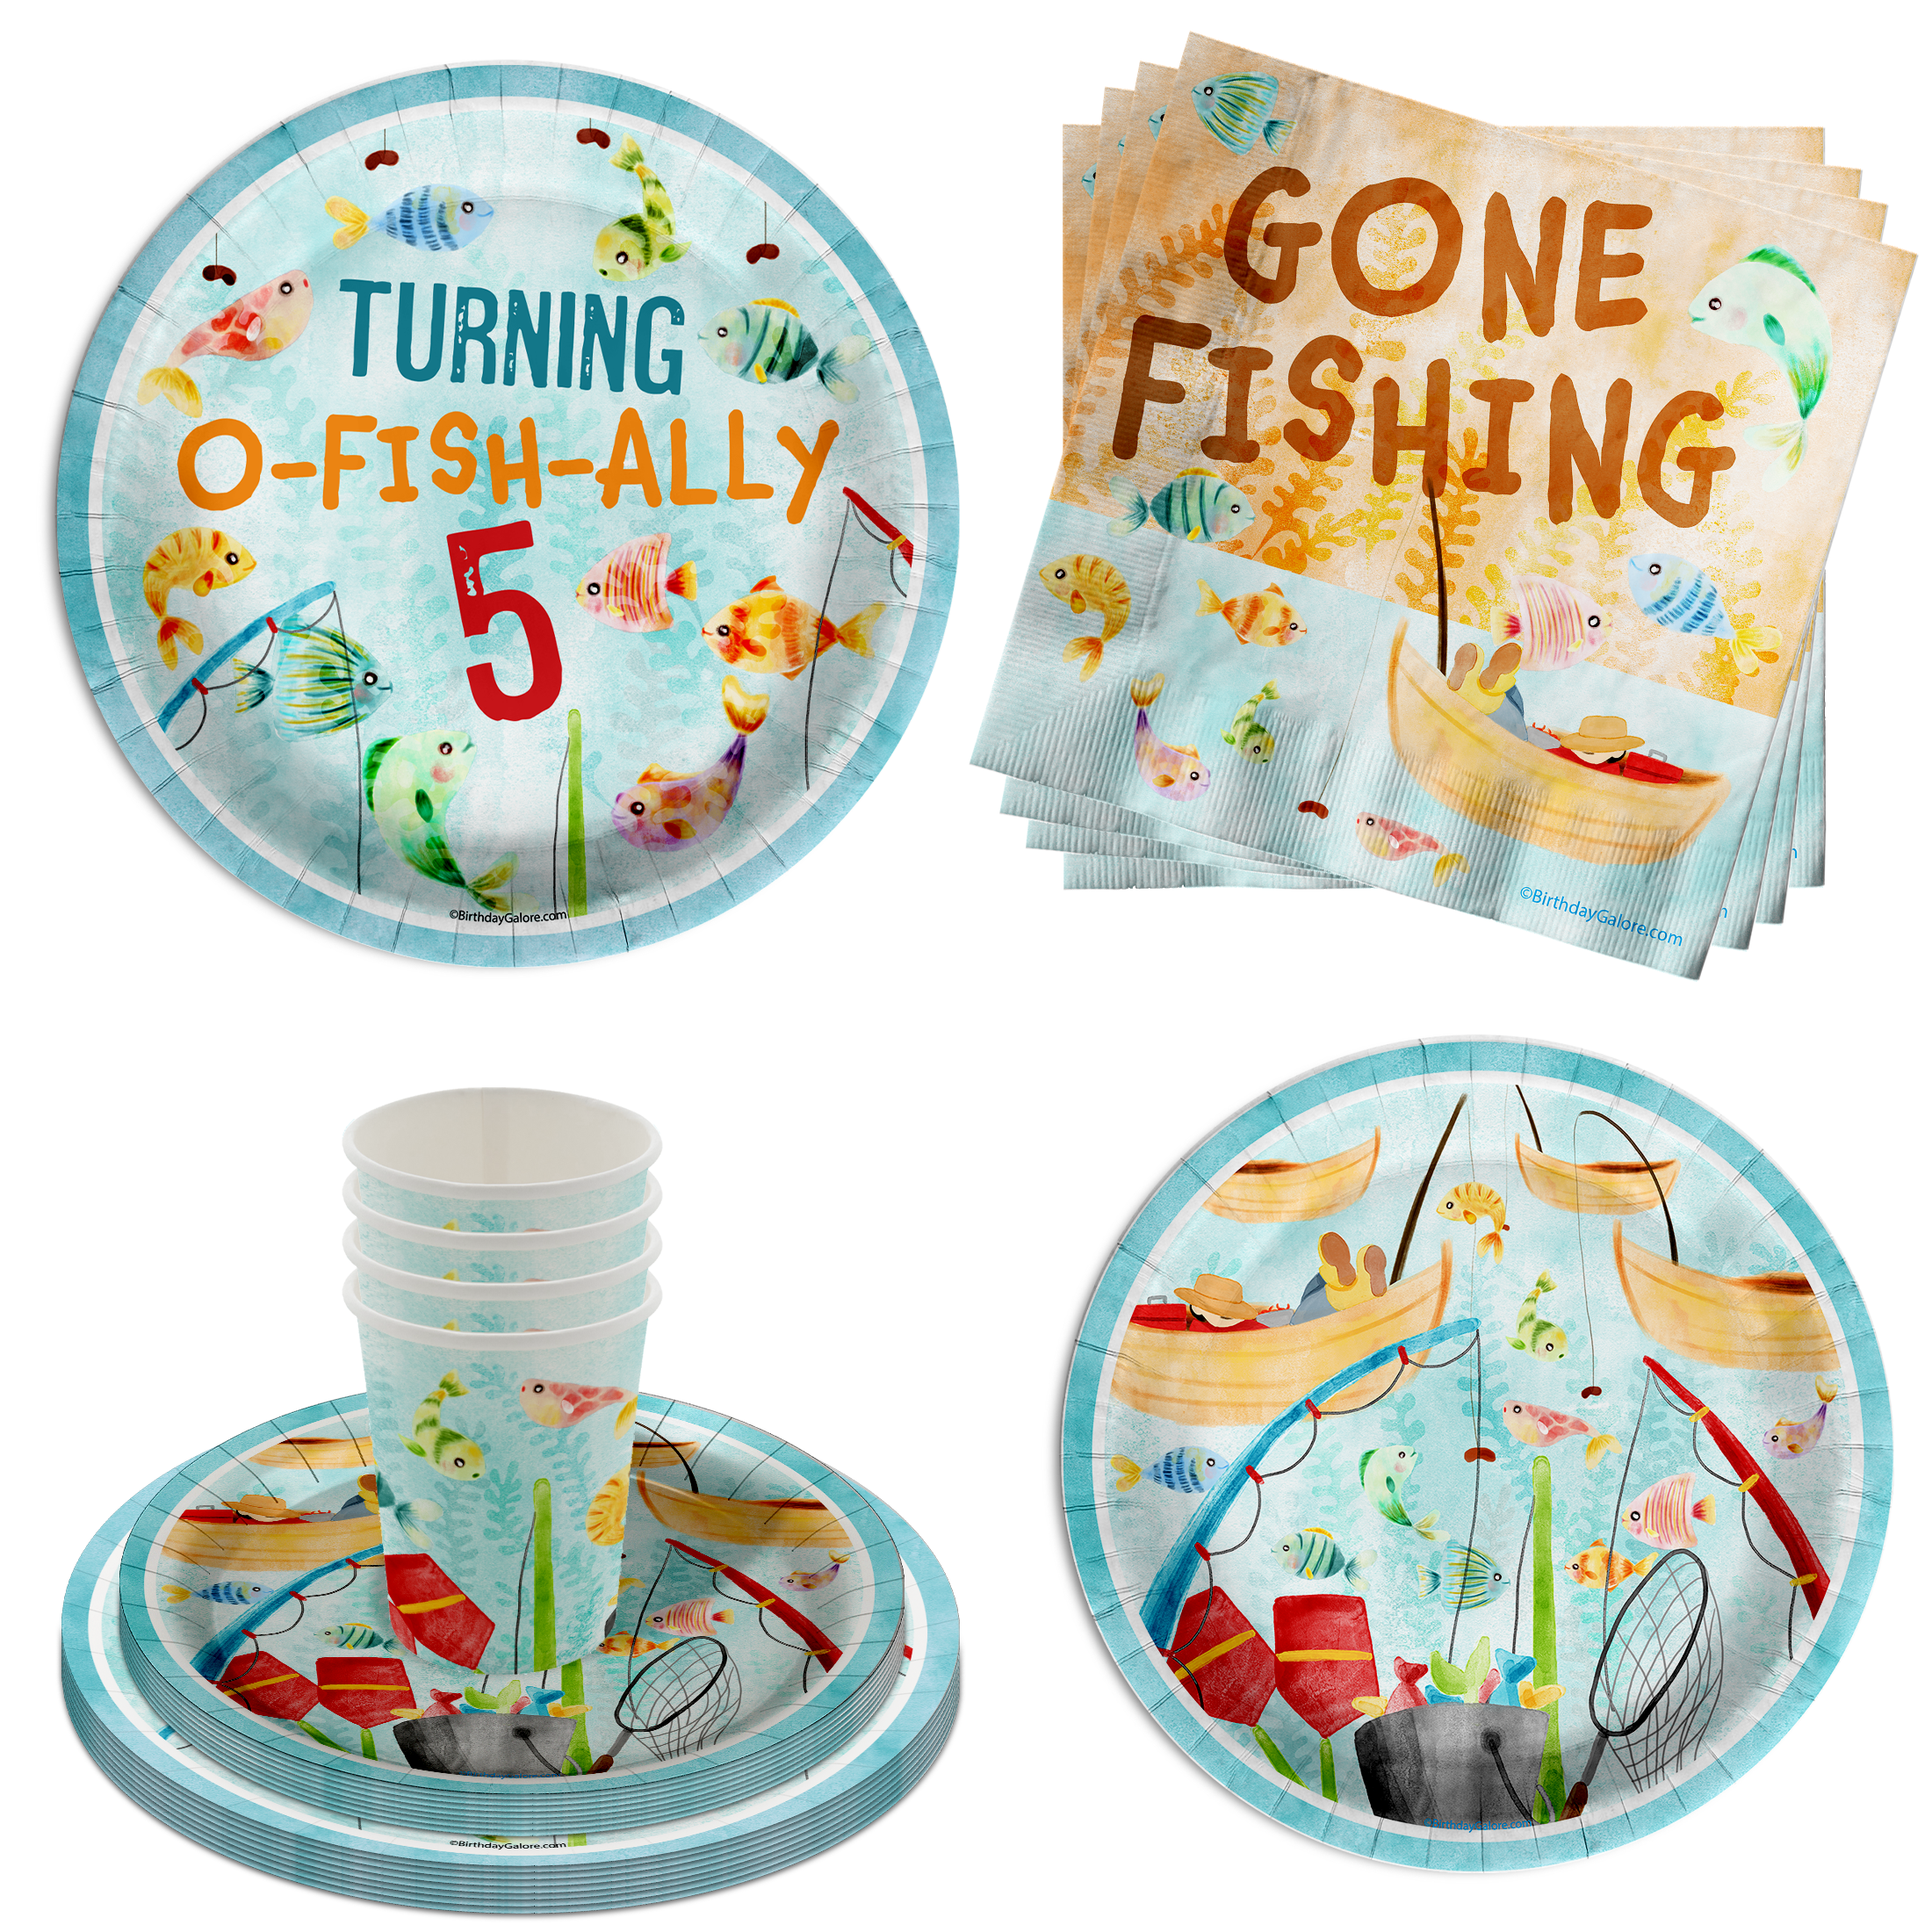 O-fish-ally Five Little Fisherman's 5th Birthday Party Kit